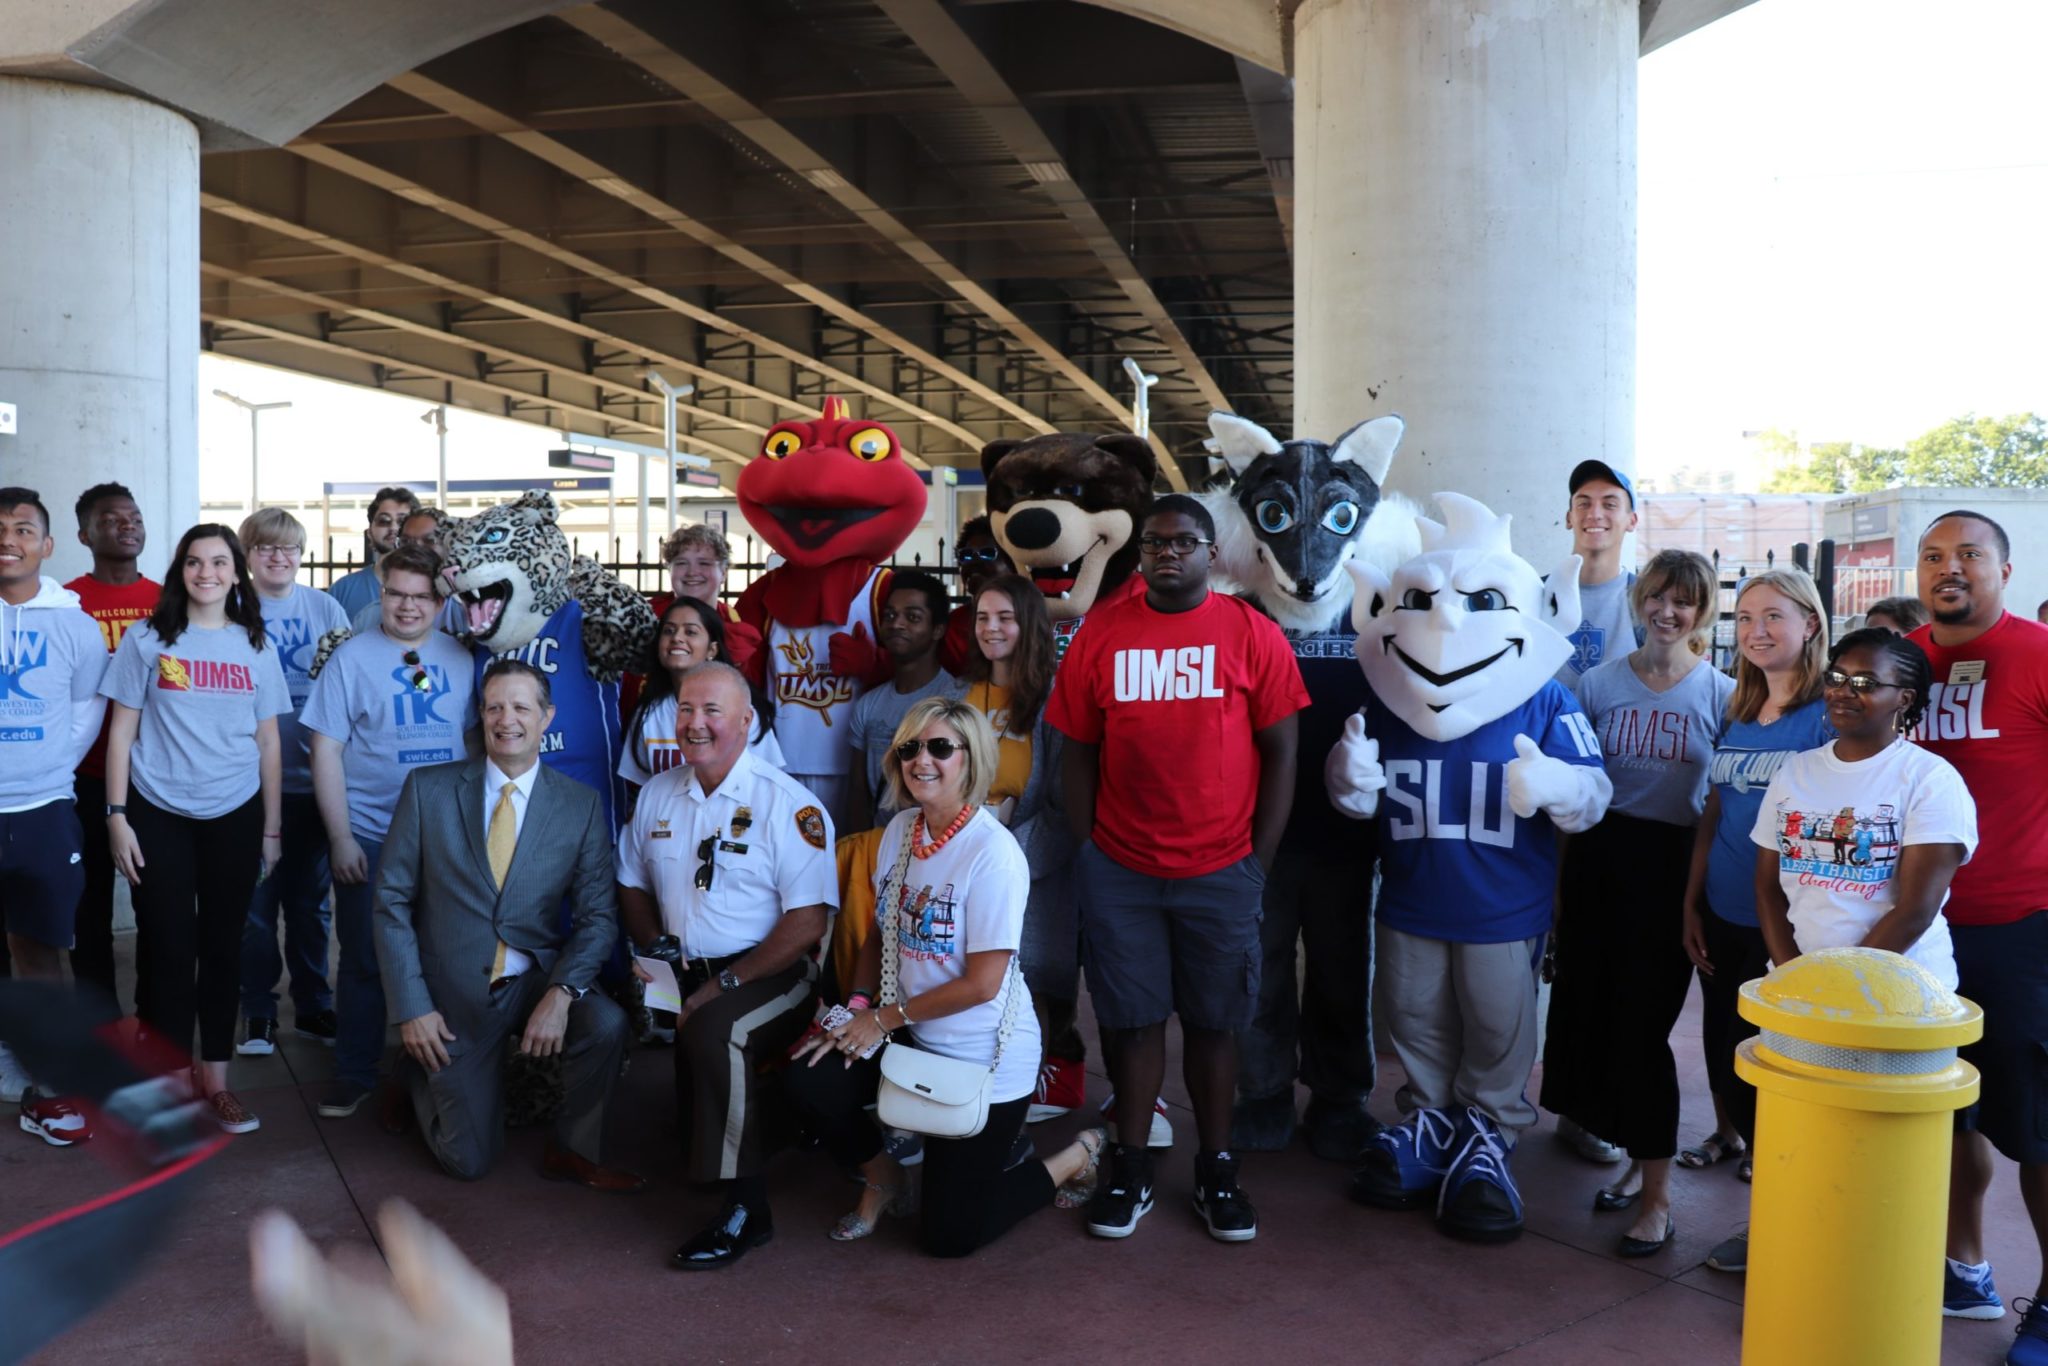 Mascots Meetup on MetroLink for the College Transit Challenge